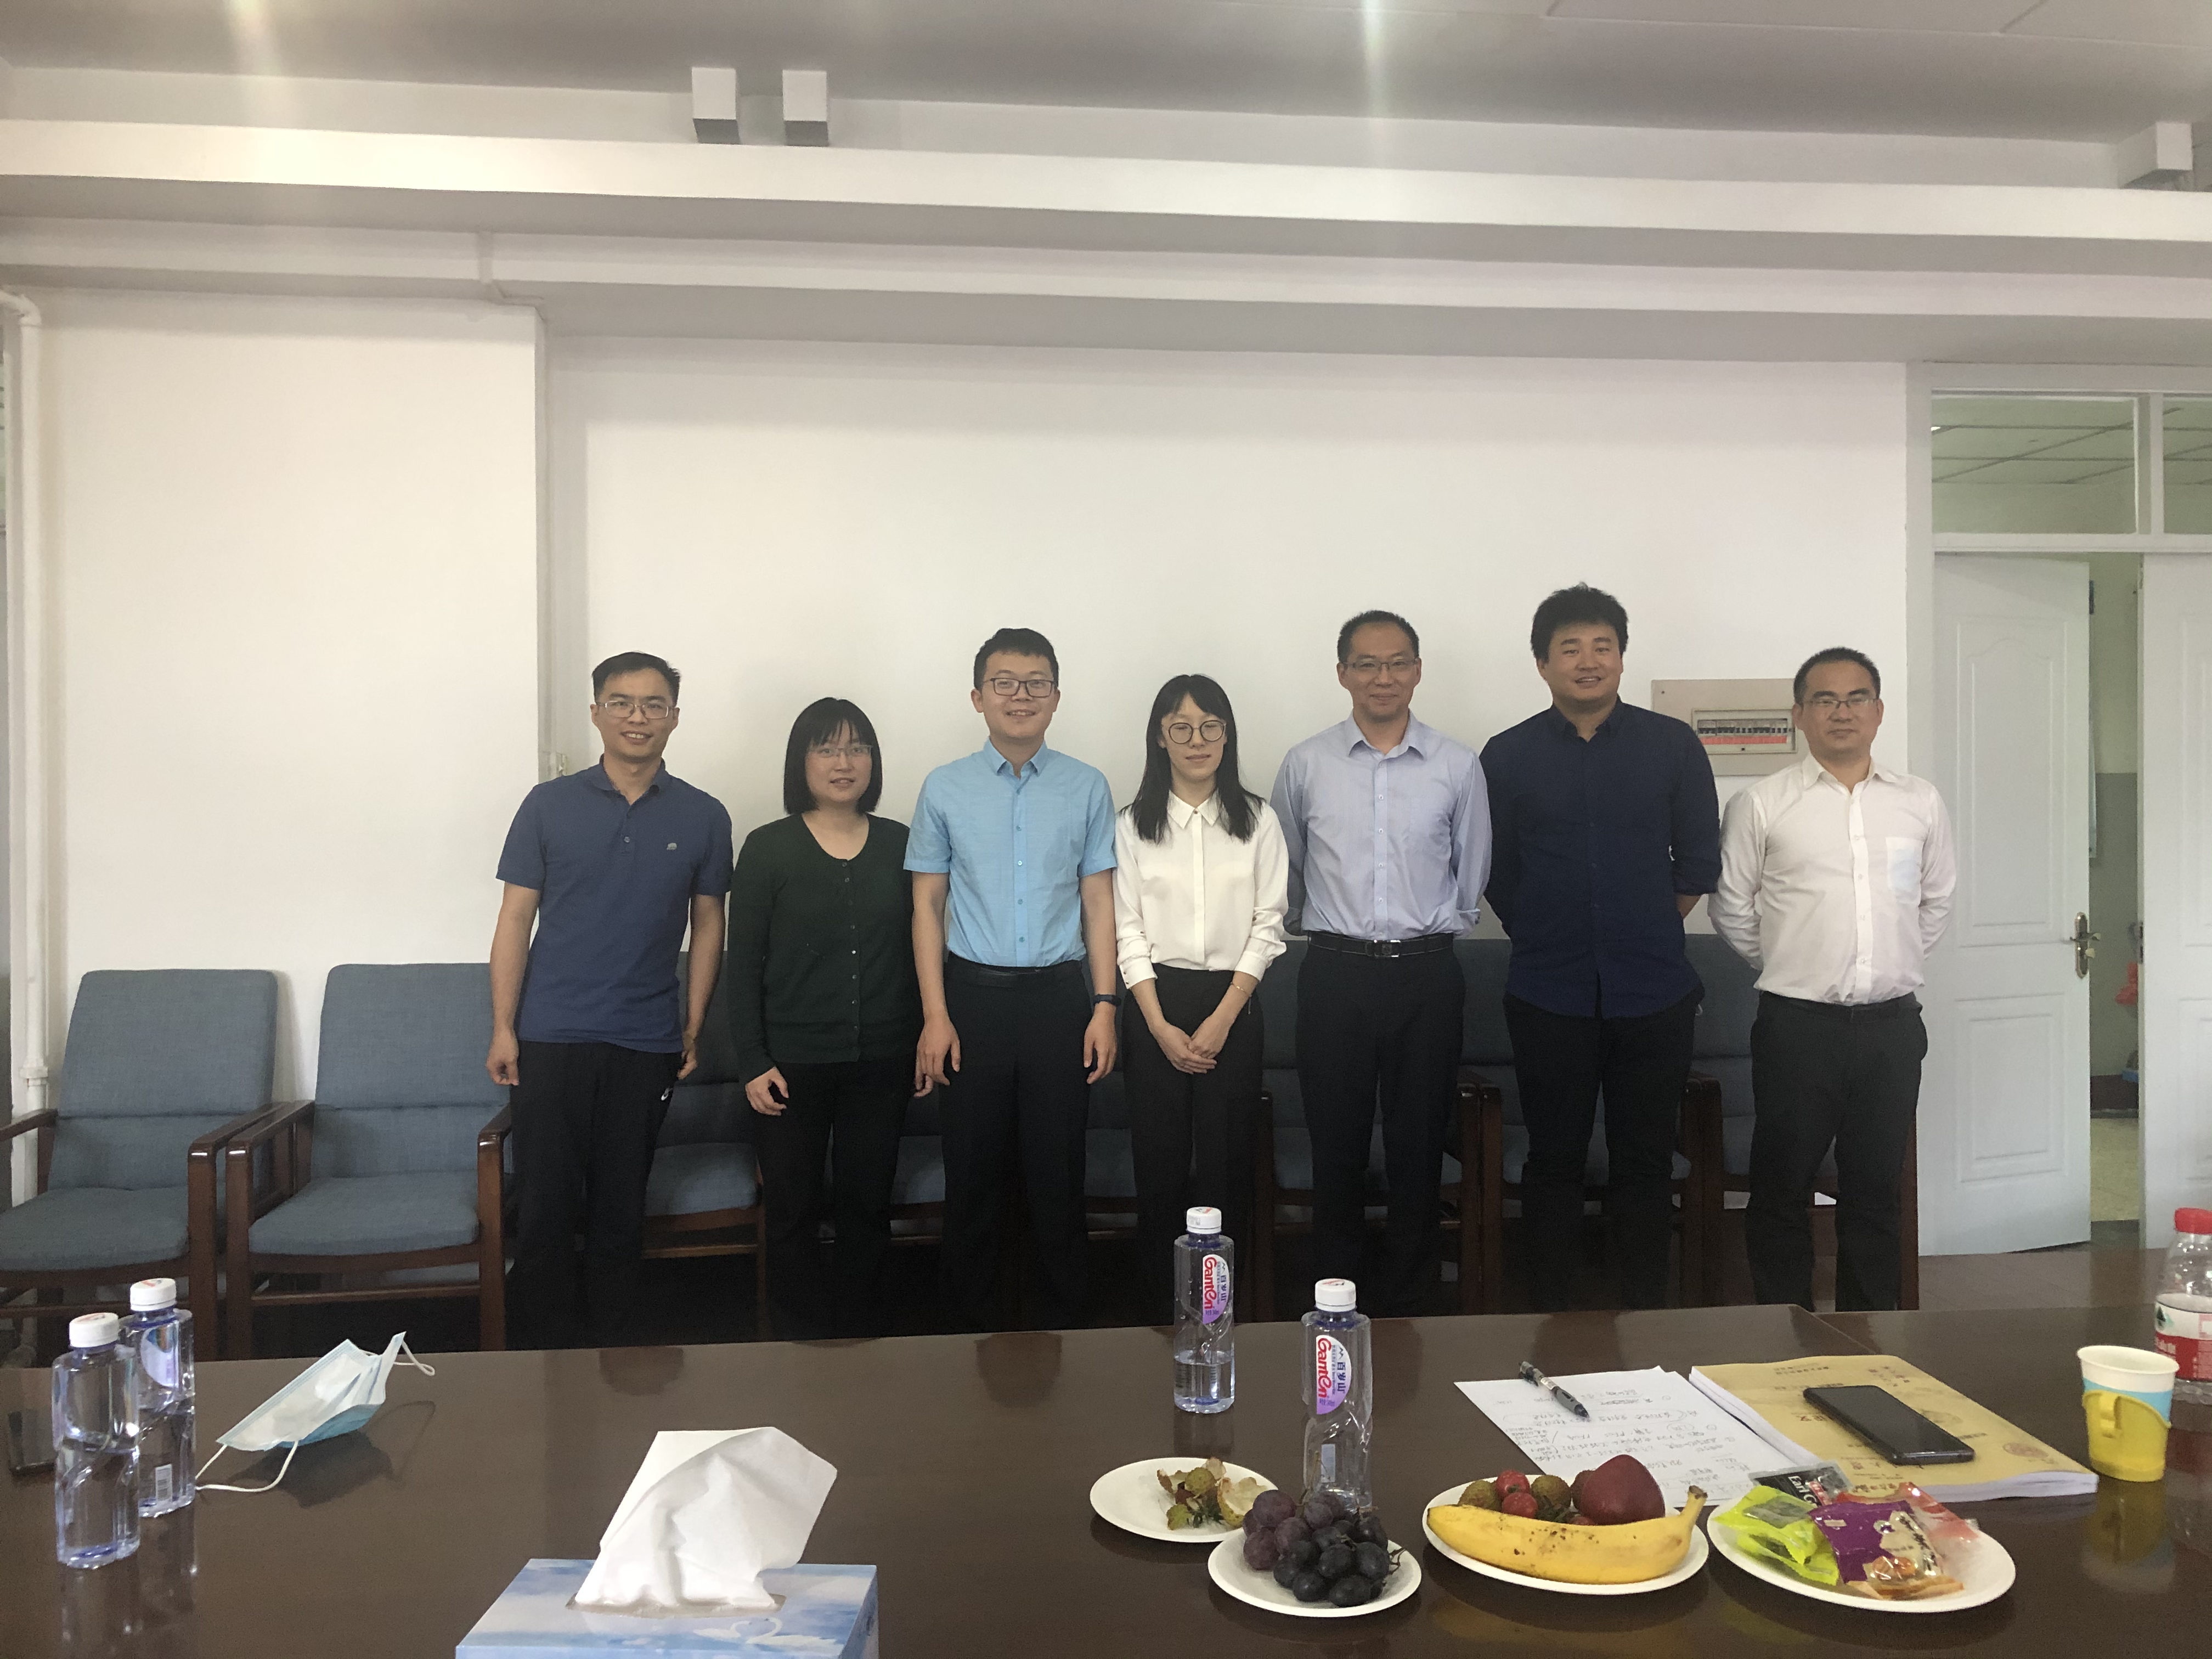 Congratulations to Wen-Chao Geng and Zhe Zheng for passing their PhD thesis defense